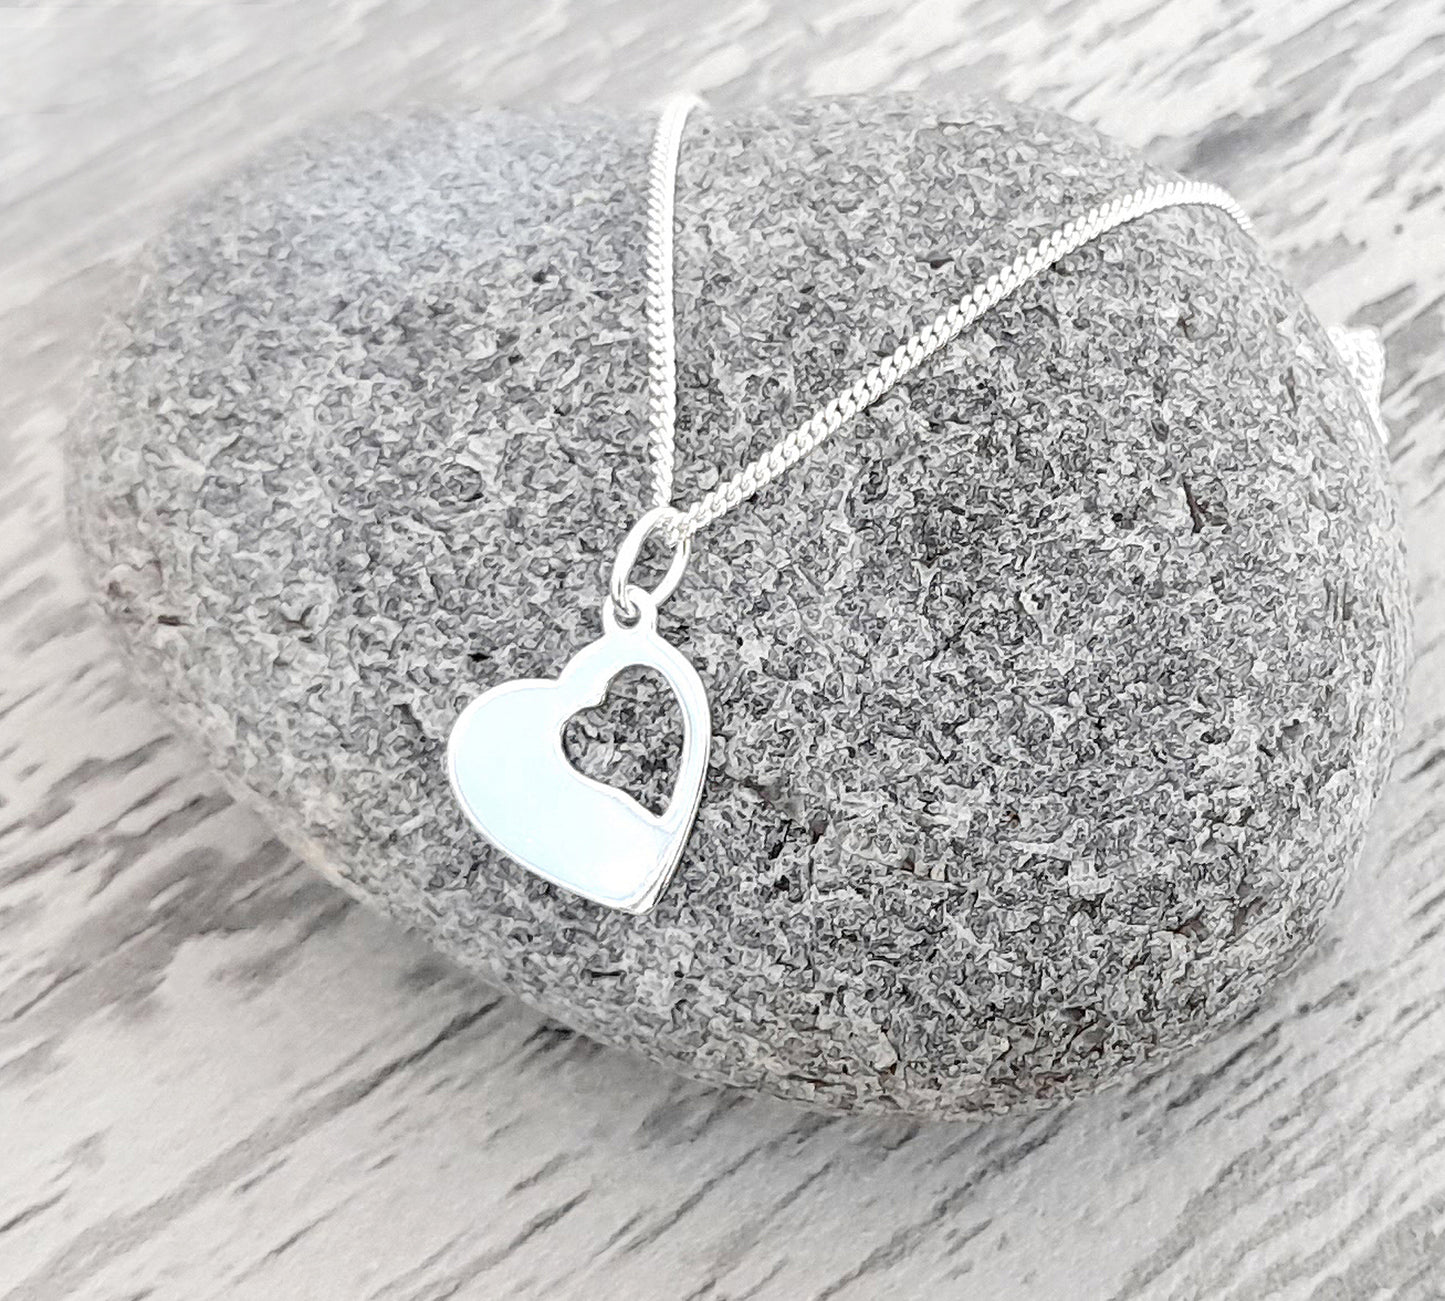 Godmother Cut Out Heart Necklace in Sterling Silver 925, Personalised Gift